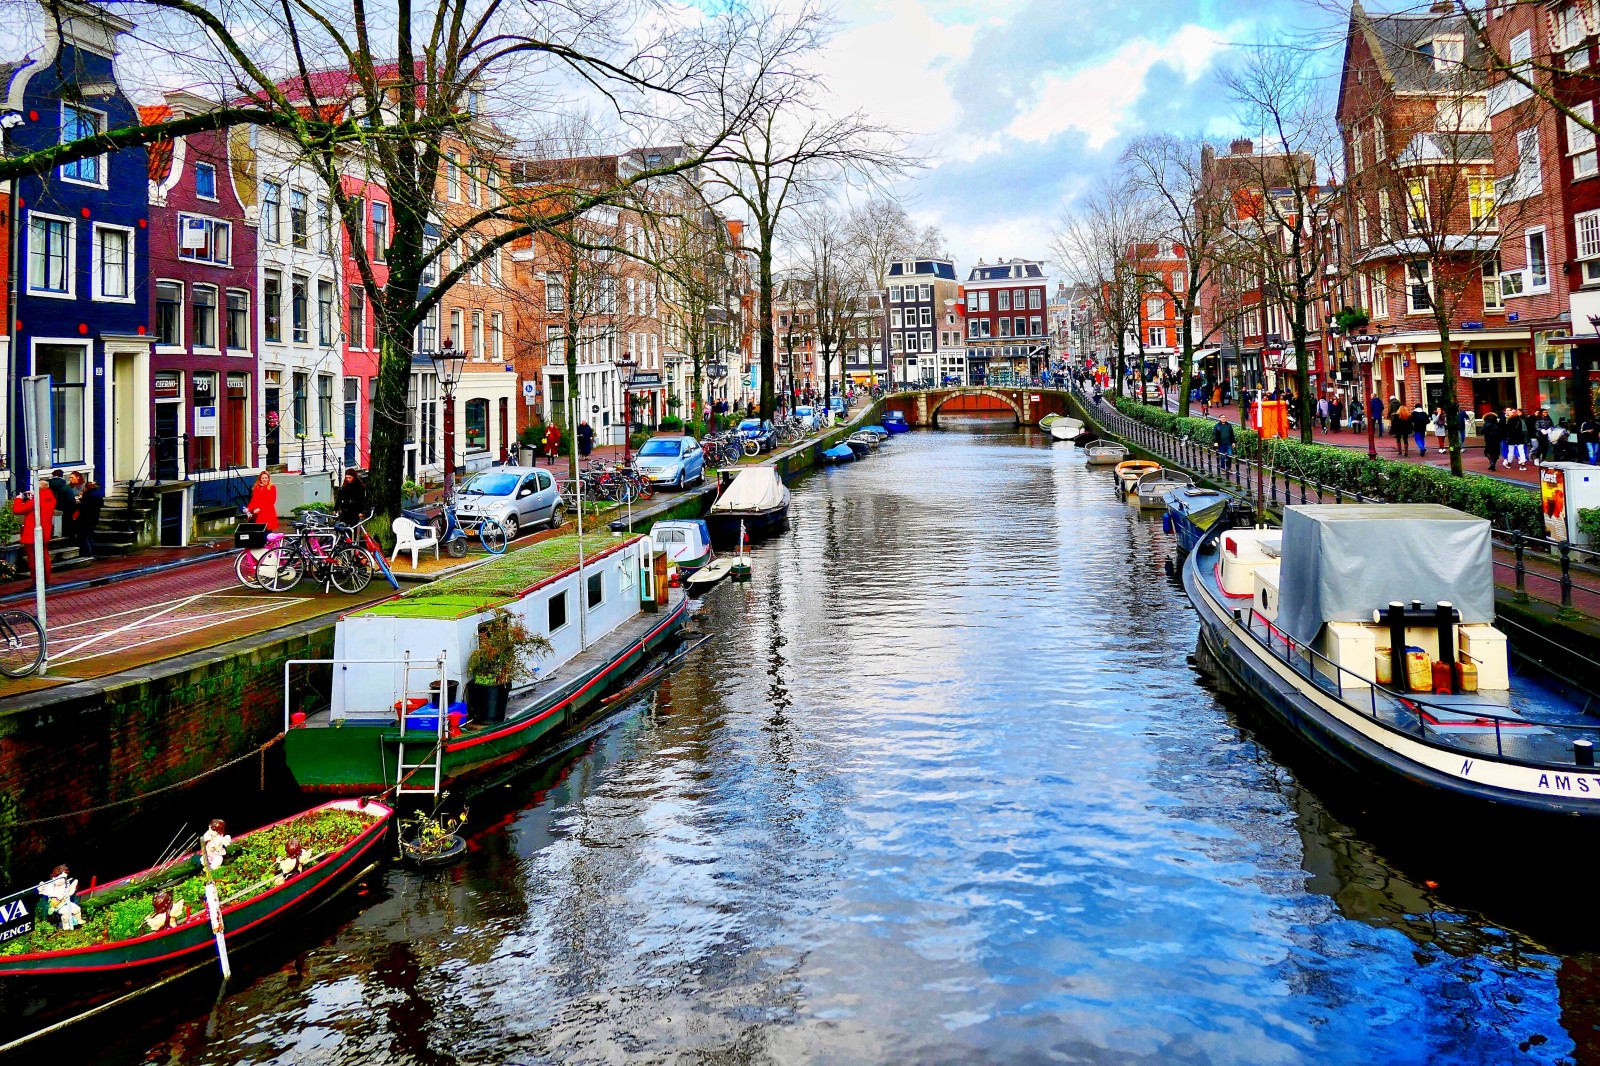 The canal and colorful houses in Amsterdam. 